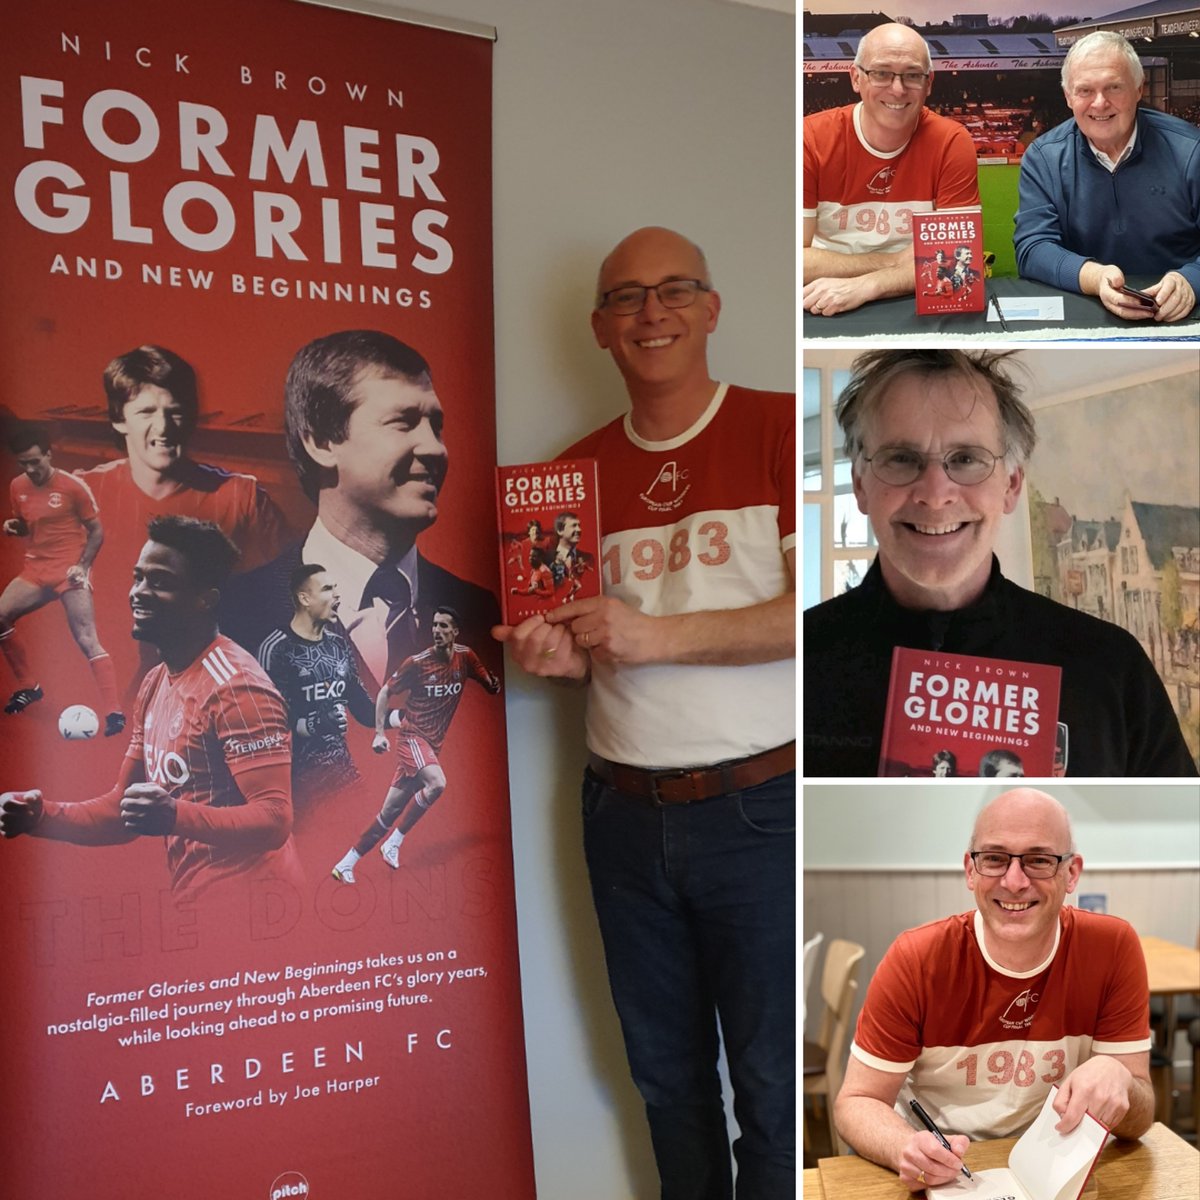 6 months since 'Former Glories And New Beginnings' released. Many thanks to @PitchPublishing , Joe Harper and all at @AberdeenFC for your help and support. 1 : Pitch 2 : AFC with Joe Harper 3 : Theo ten Caat 4 : Waterstones @CaatTheo #aberdeenfc #COYR #StandFree #Aberdeen